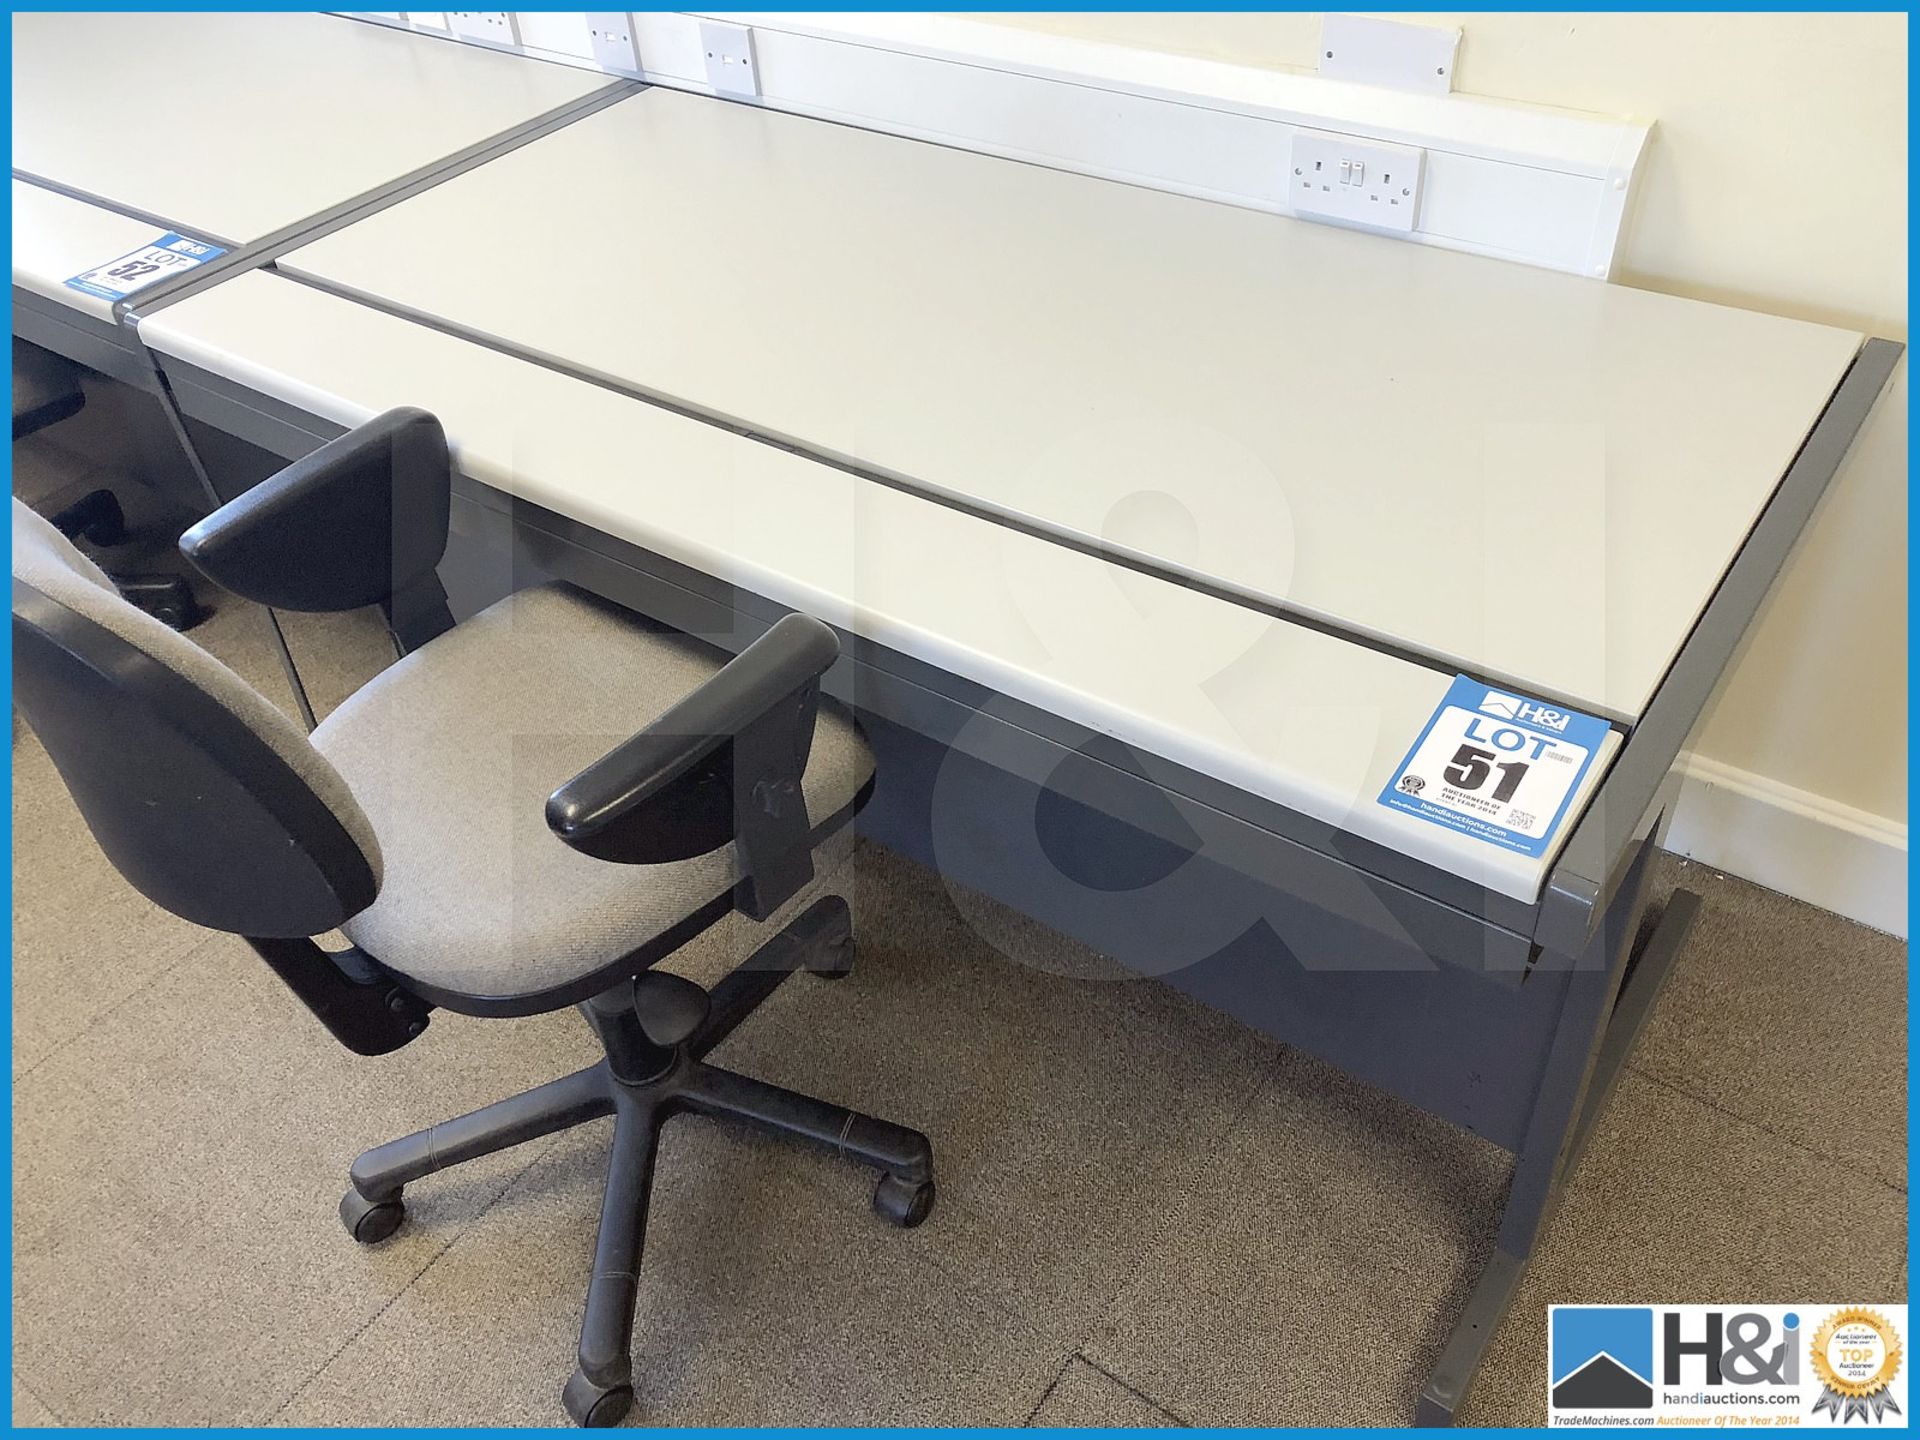 Excellent Project metal framed office desk with rear lift up cable tidy section. Presented in excell